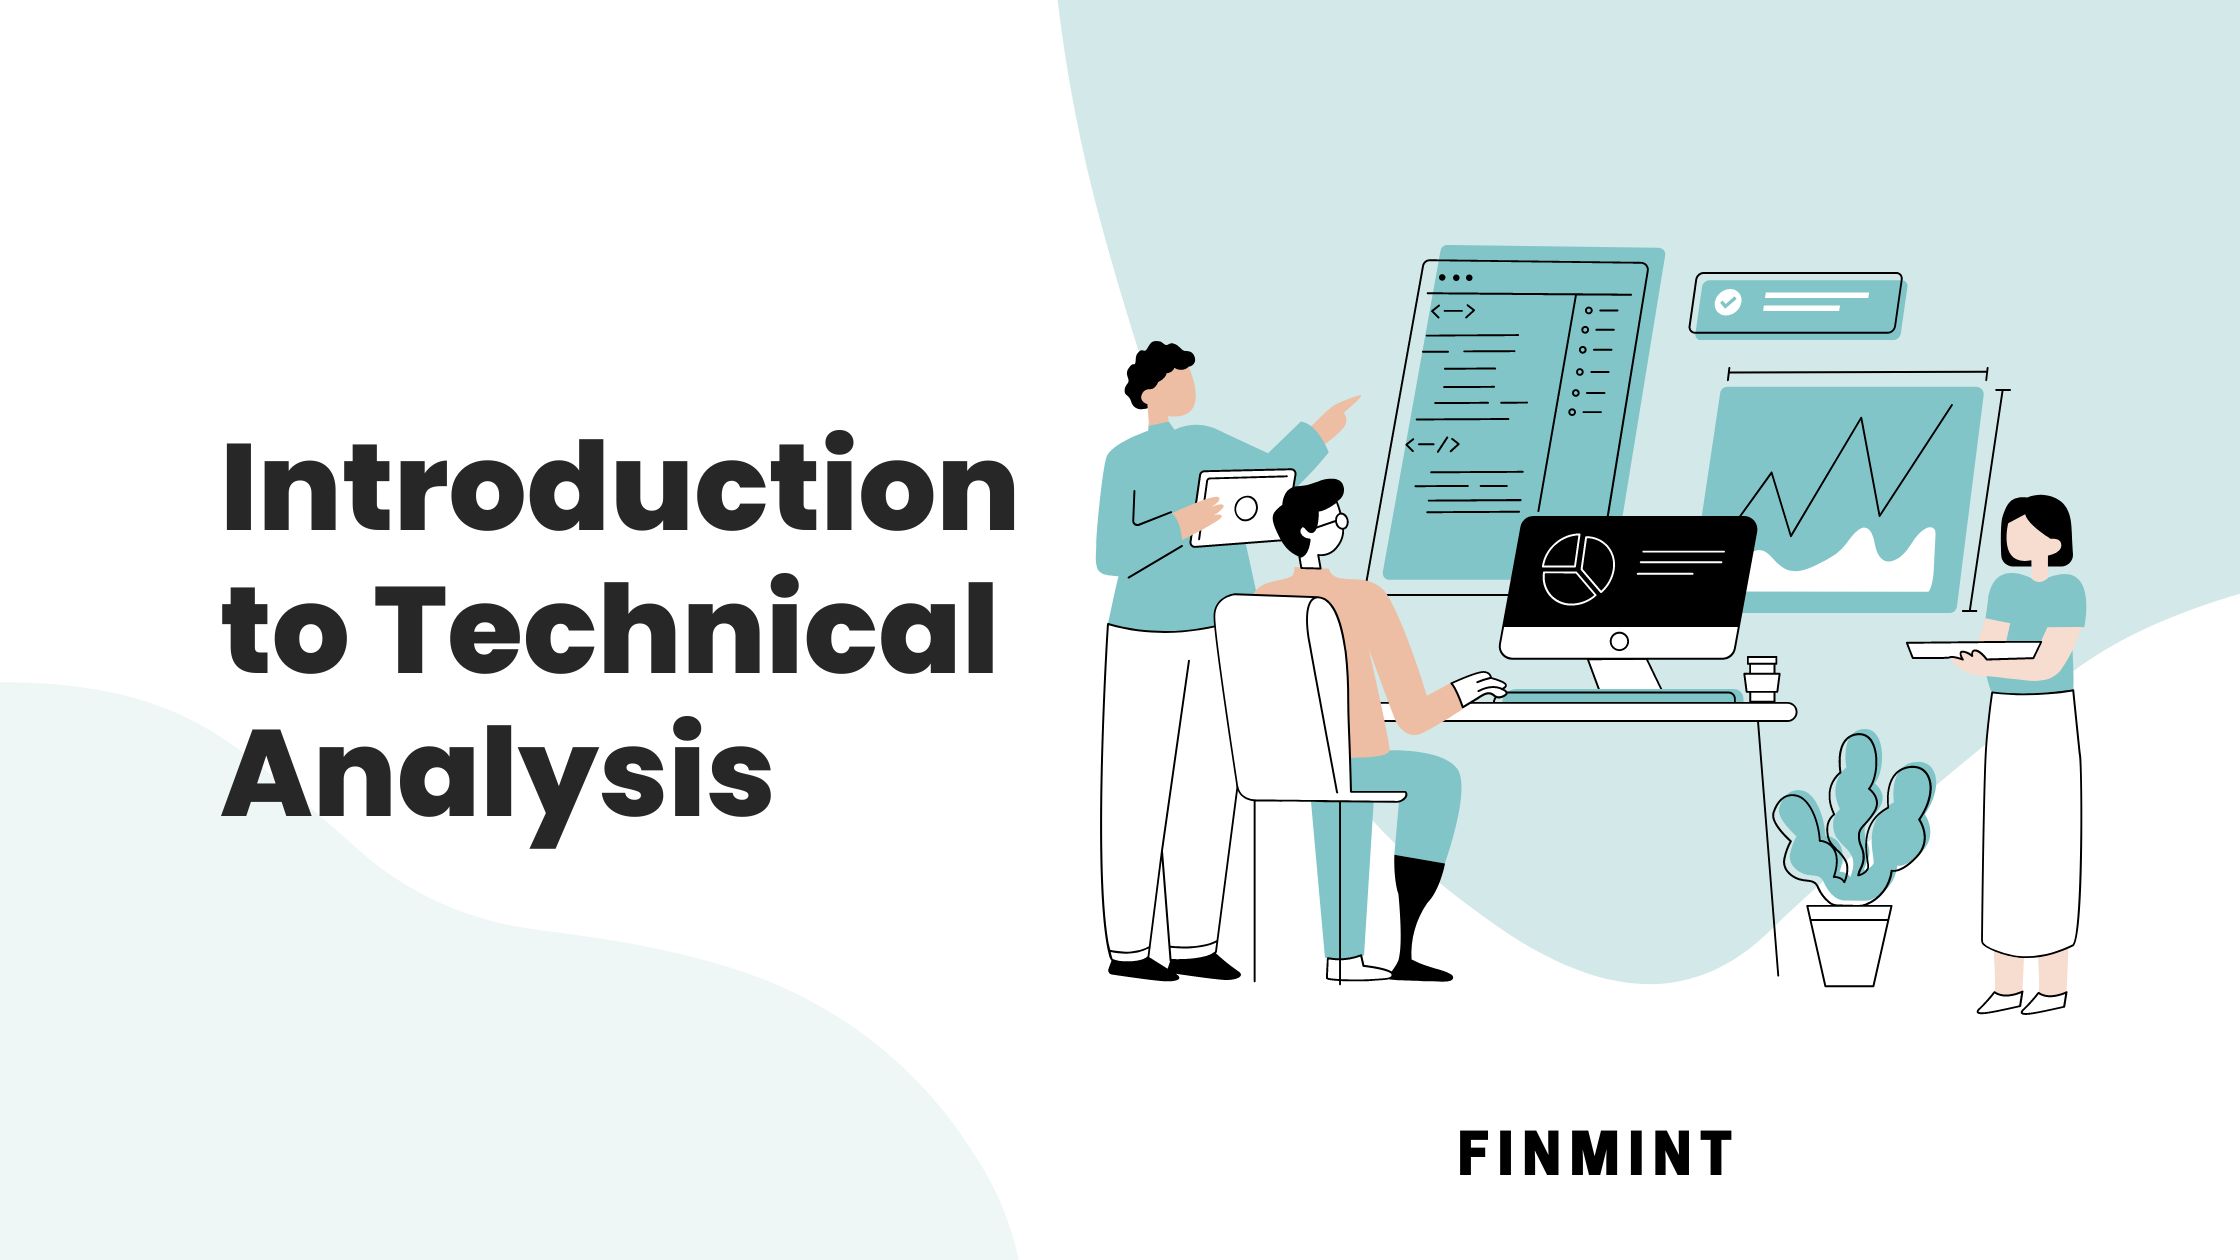 An Introduction to Technical Analysis